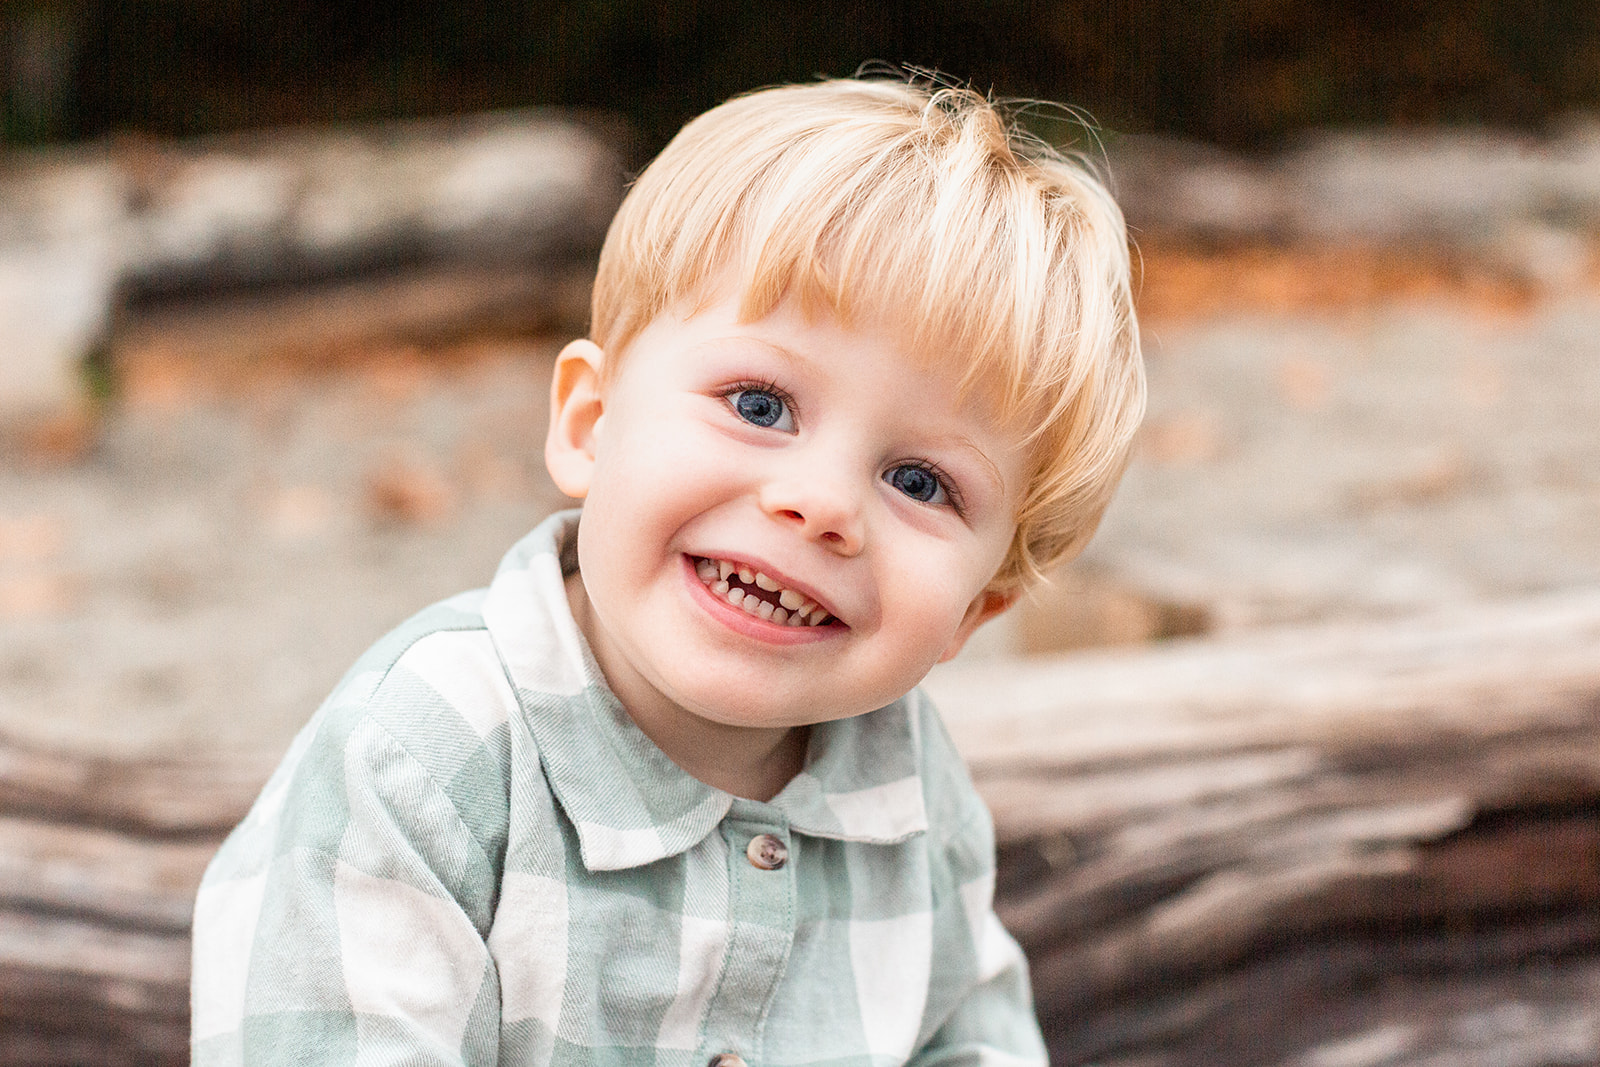 A young toddler boy smiles big while sitting in a green plaid shirt after visiting Portland Baby Shower Venues